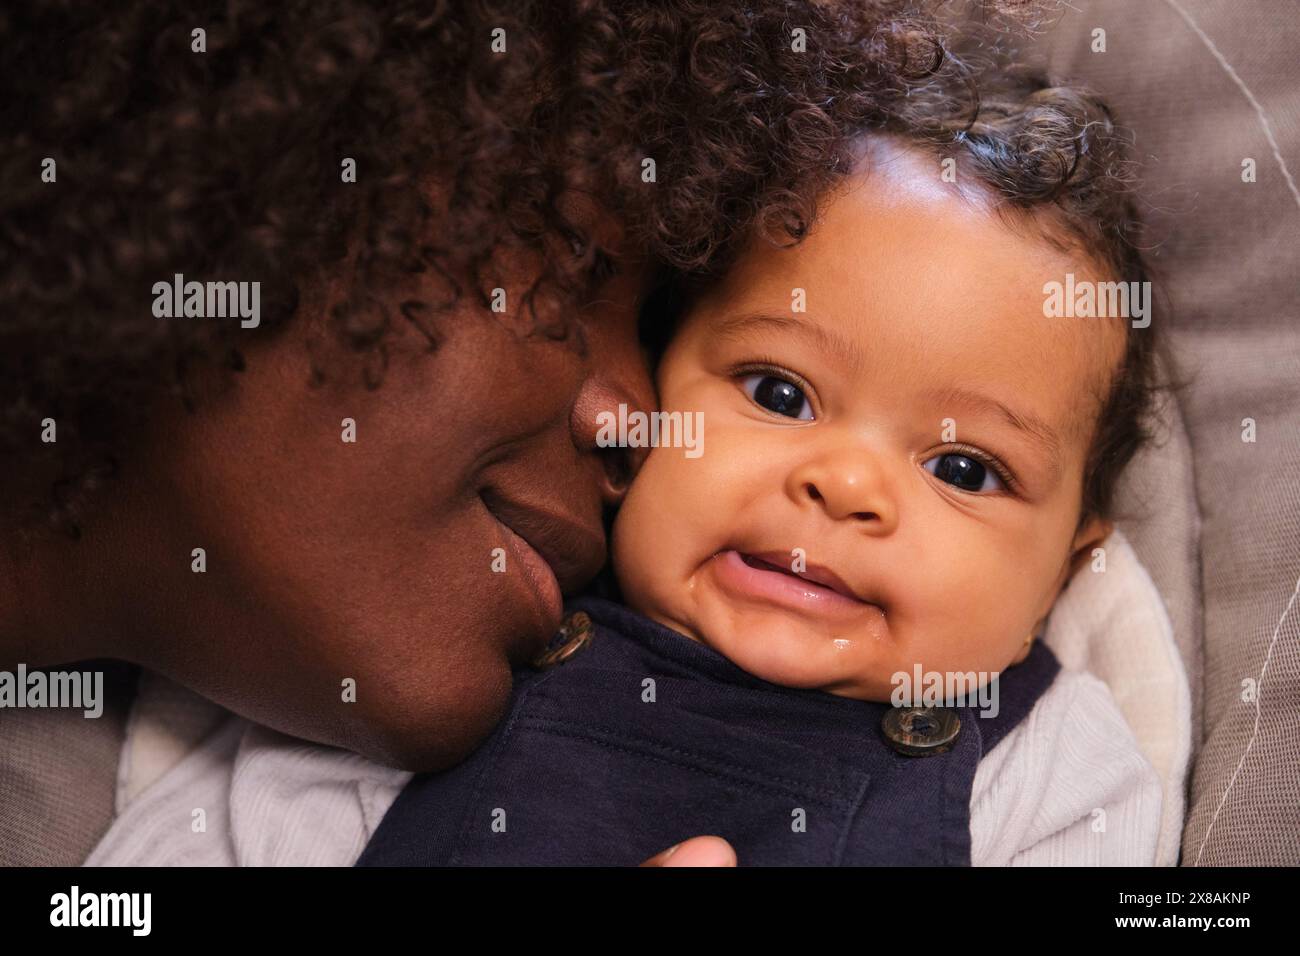 African woman with her baby girl, scene is warm and loving. Stock Photo